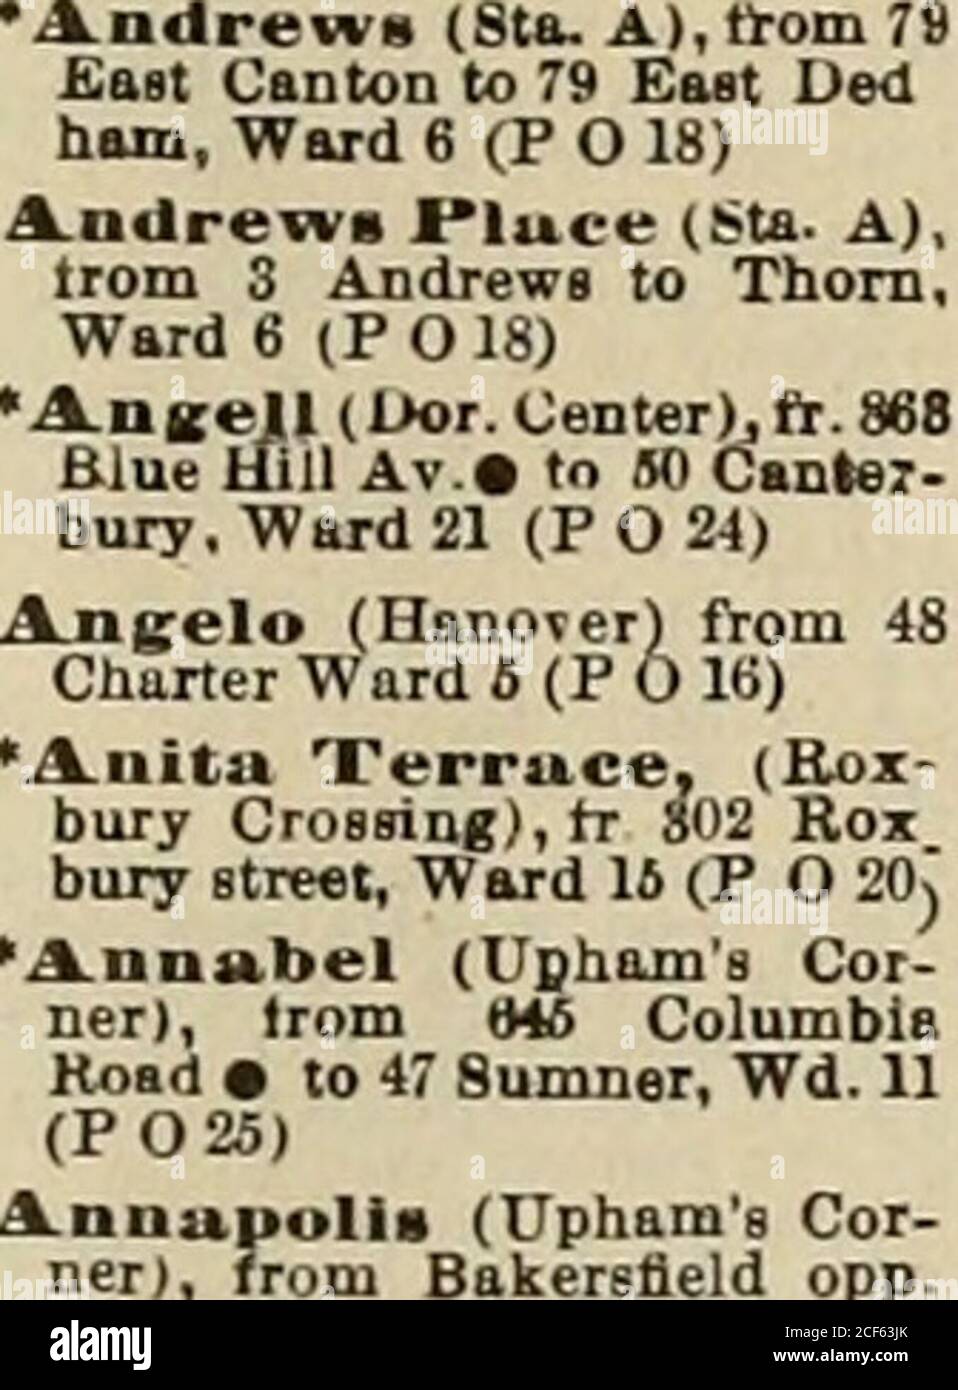 . Boston register and business directory. Uoiiuld f^quare (W. R.) Dorchester AvBoBion, Preble, Southamptonand Dorchester ets.. Ward 11.A.DdrewH I ir Corwin24 Arcadia Place32 Arcadia Park *i&.rcadia JPark (Dor.l.tr.32 Arcadia to 23 Diteon, Wd.. 22 Oompton Building 4fi Hawley Plao«62 47 Franklin* 101 Bussey Place114 111 Summer*.^rch l*lace (Hanover),ft. 119 Fulton to Richmond.Ward 6 (P O 16)AJChdale Koad (Rot.),ftom 3999 Wash, to 562 South,Wd.22(P0 31)A.rcola (Rox. CrosainK), ft- 71 Day, Ward 14 (P O 20)*A.rdale (Dor.), tr. » Bean-moDt to Elm Road. Ward 20 A.n8lov Square (Maijuucilon Babson and Stock Photo